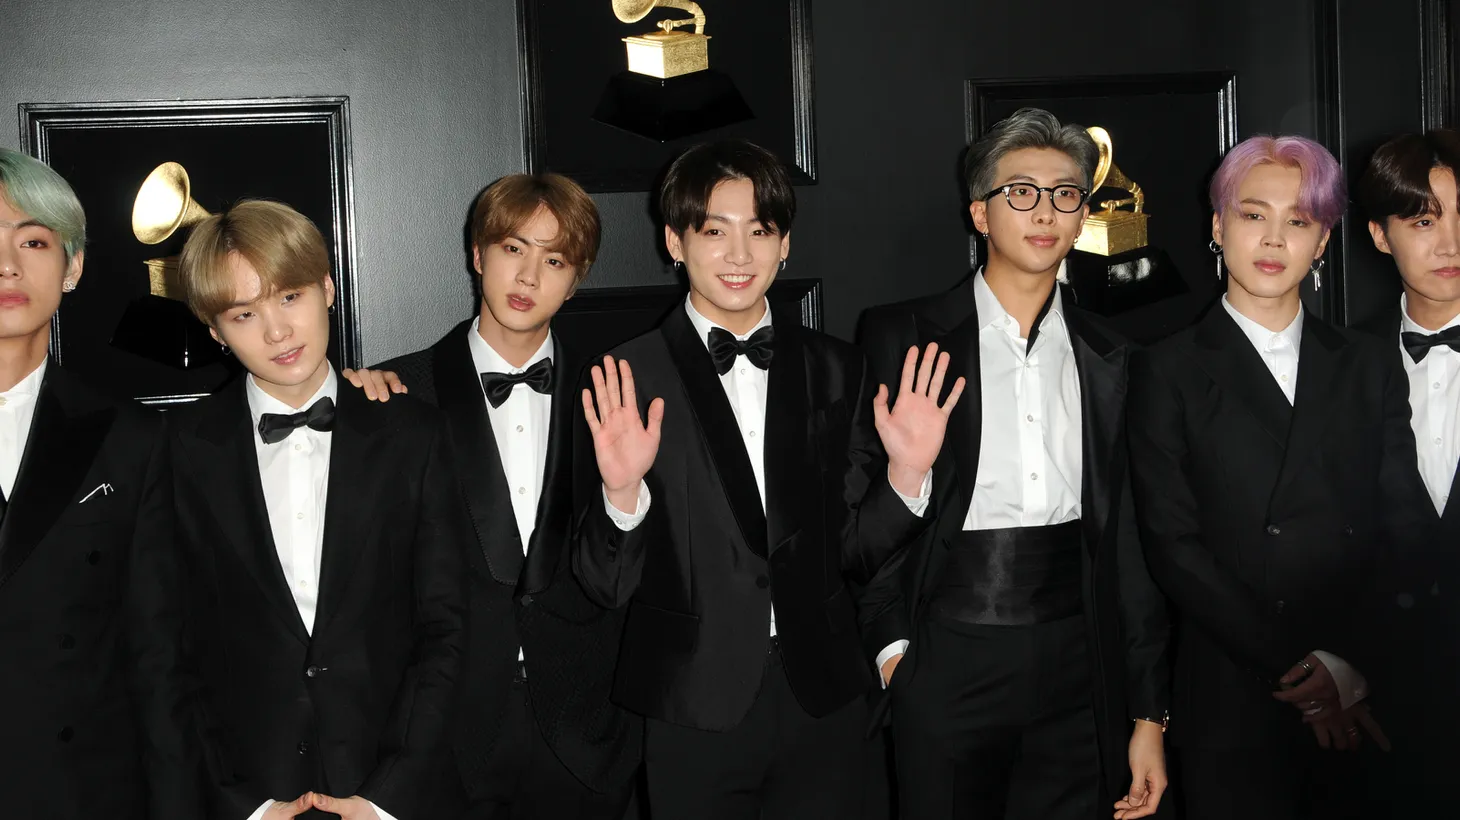 BTS at the Grammy Awards on February 10, 2019.